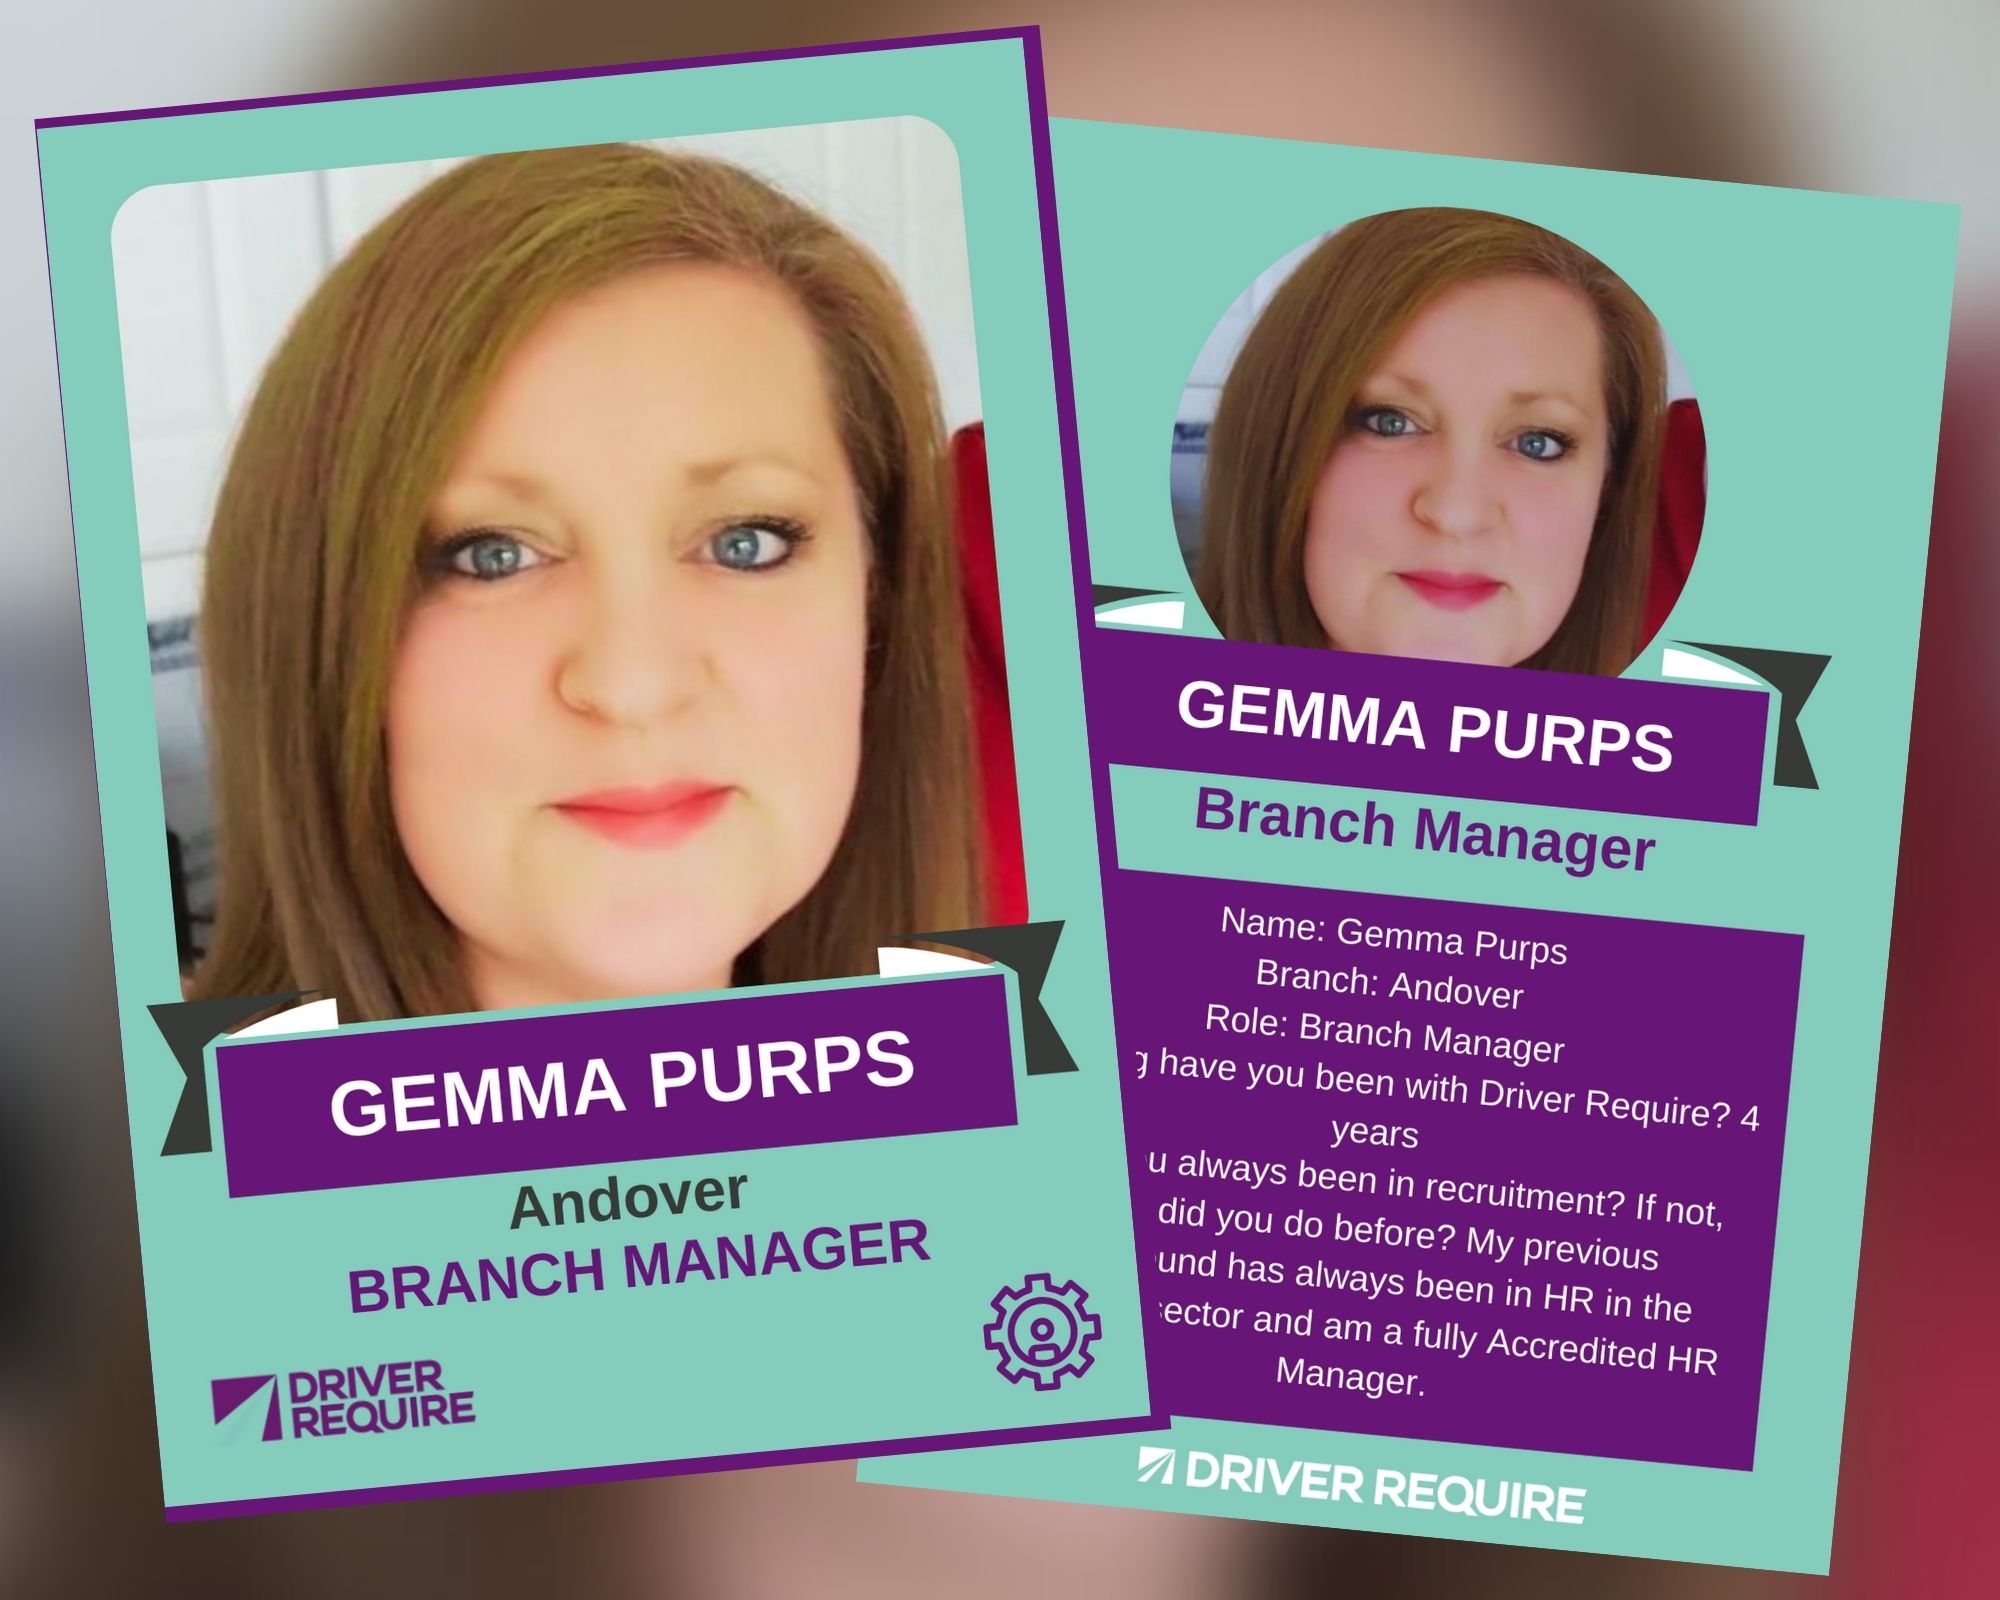 Gemma Purps - Andover Branch Manager